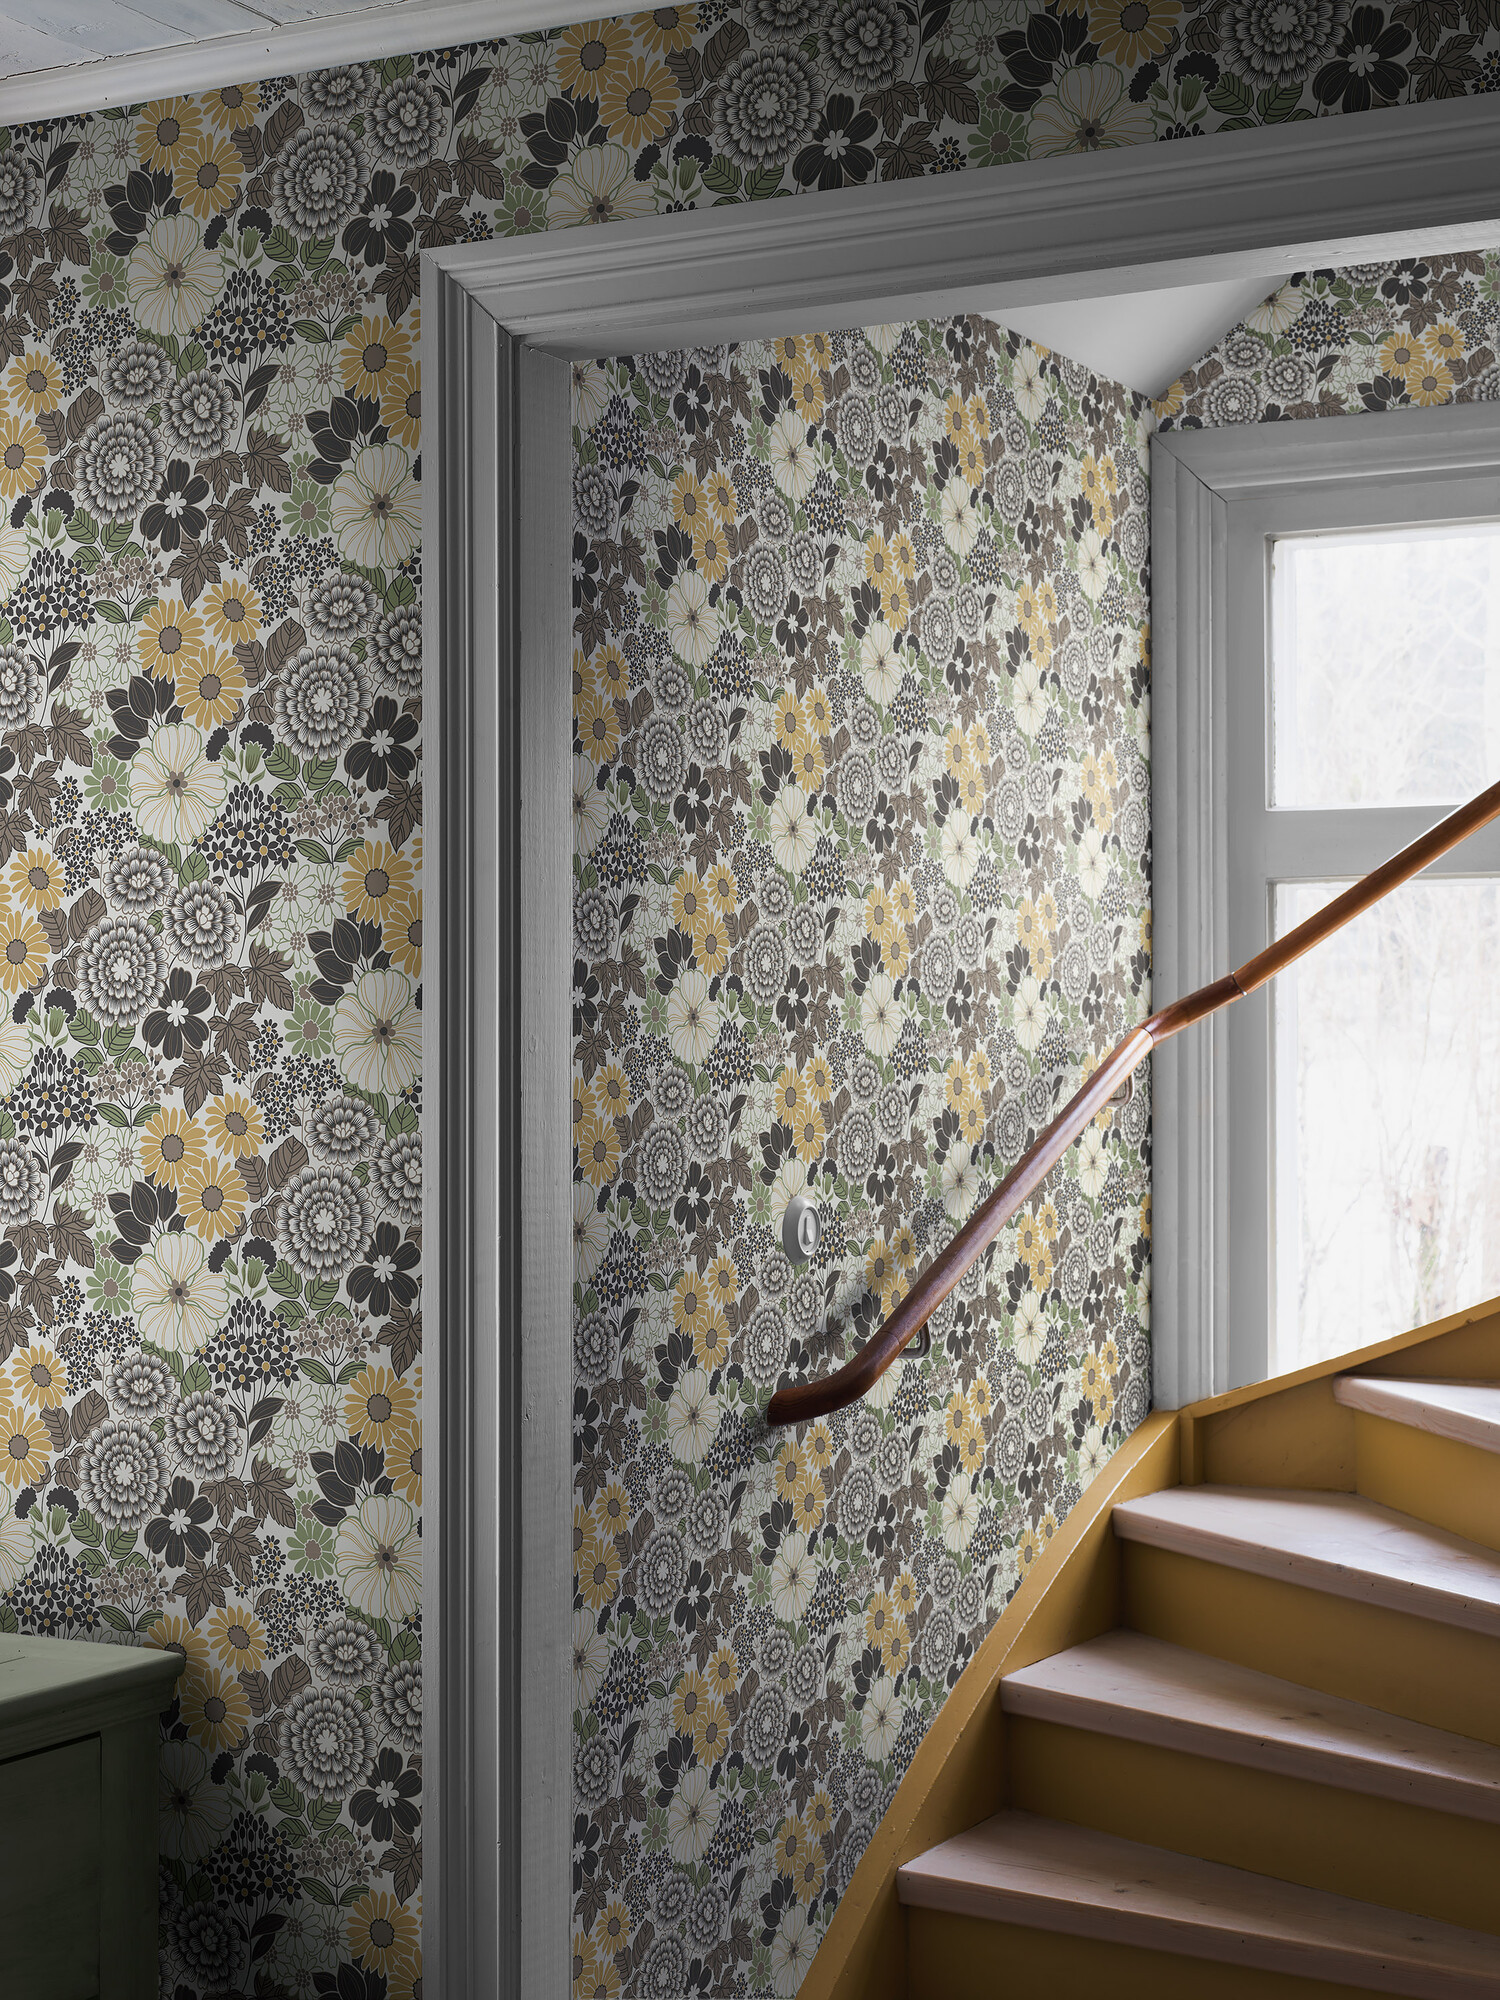 The wallpaper pattern anita from borãstapeter anita wallpaper floral brown and yellow retro flower power